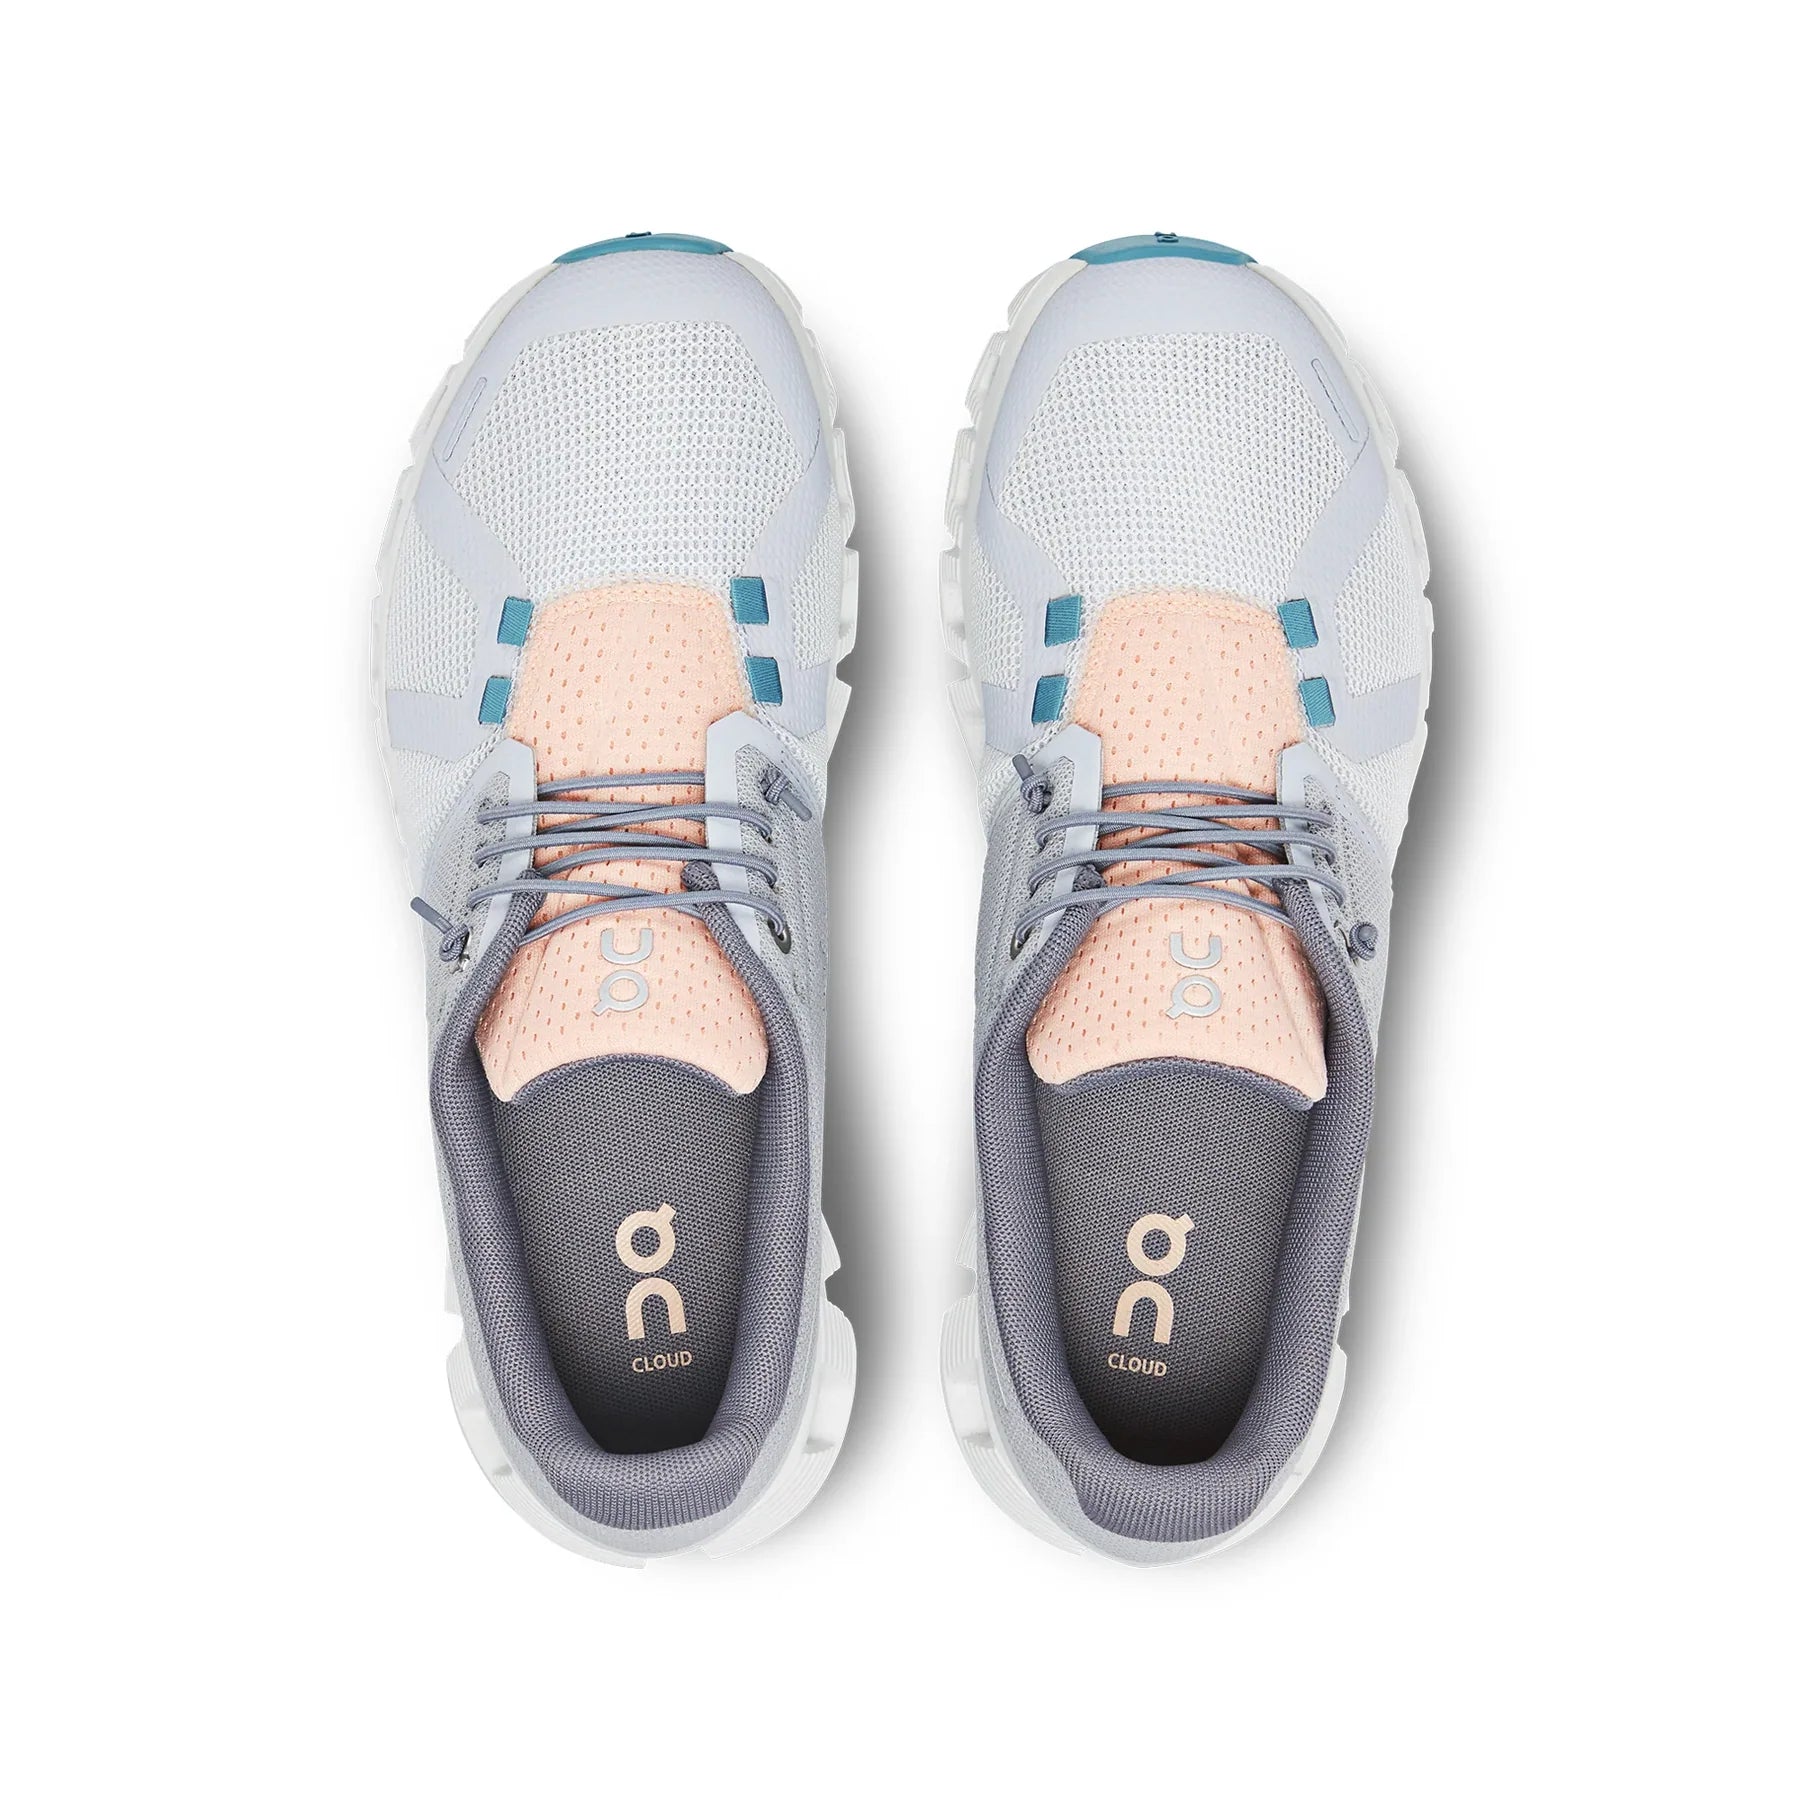 Top view of the pair of Women's ON Cloud 5 Push shoes in the color Glacier/Undyed White